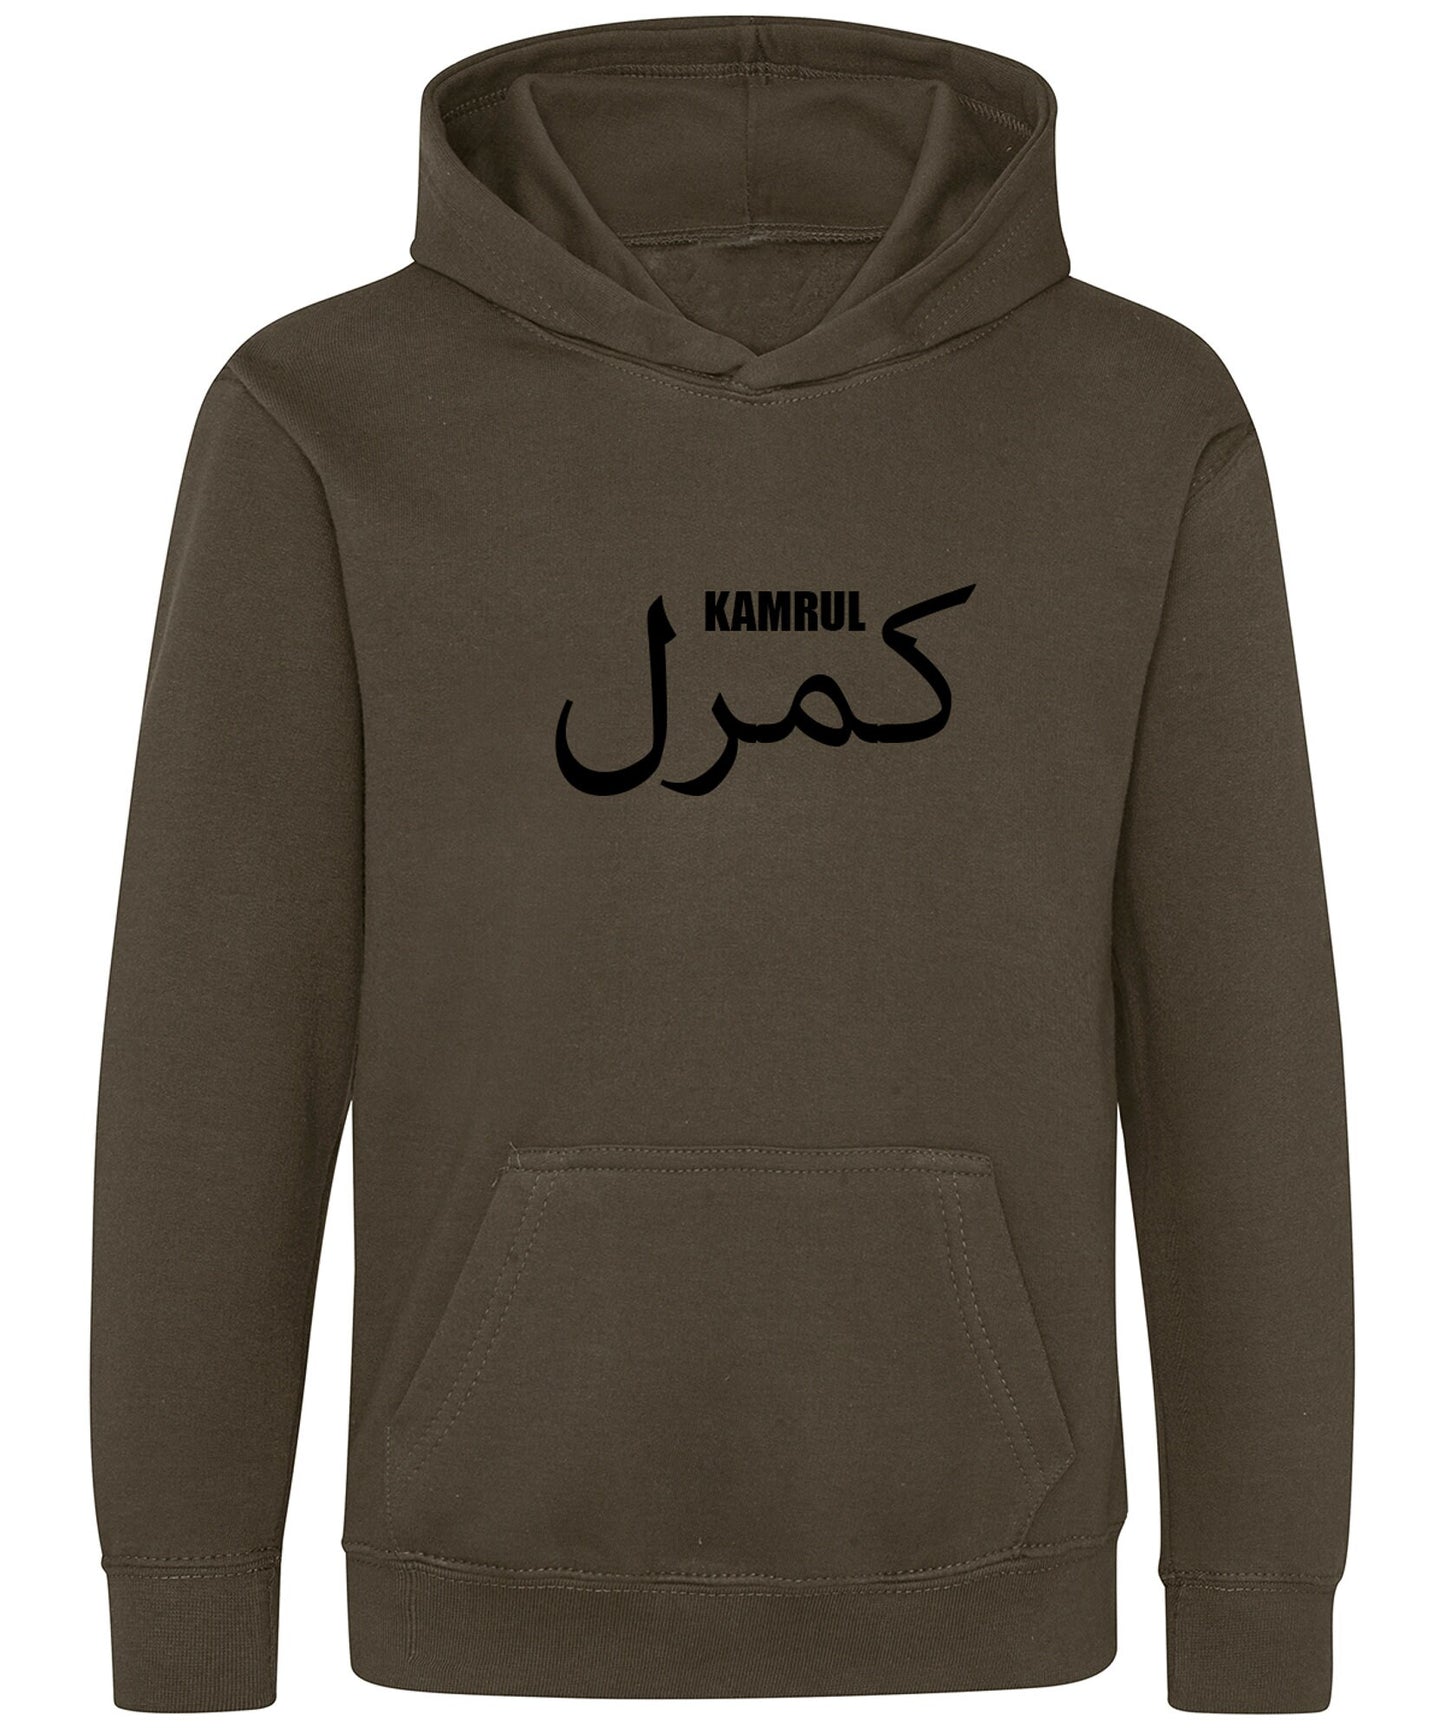 Personalised Children's Unisex Hoodie with name in Arabic & English